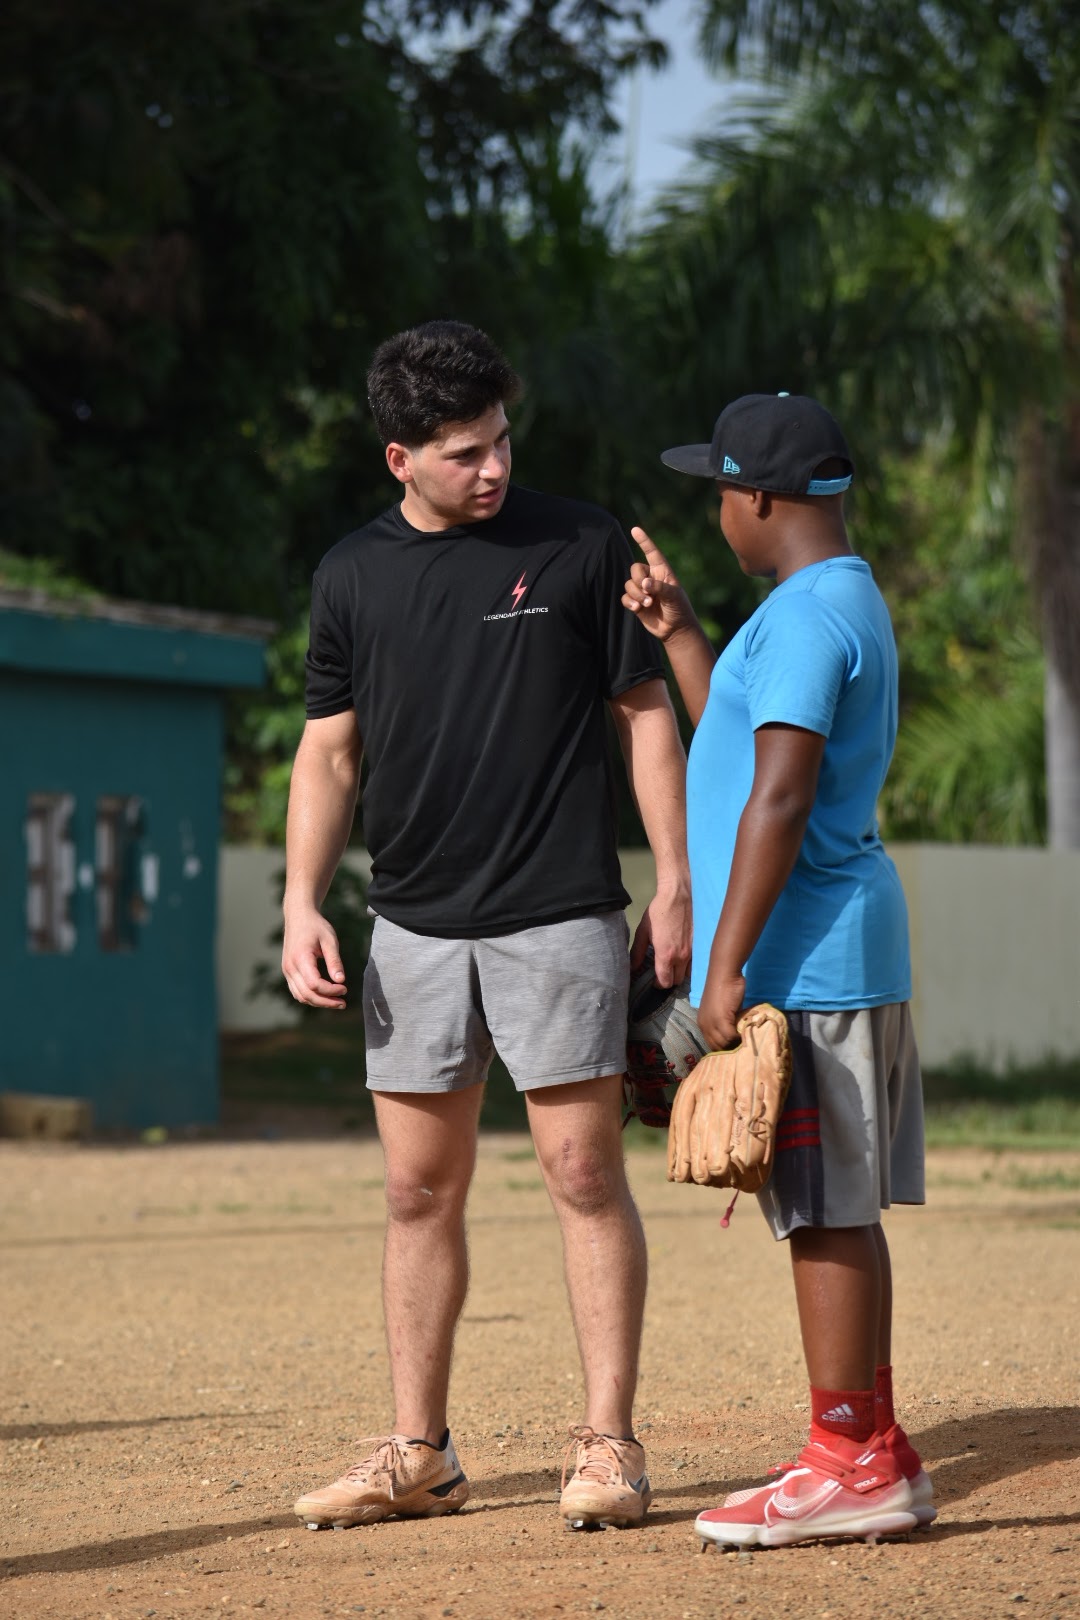 VISIONS Baseball Drive: Passing the Torch and Expanding Our Reach